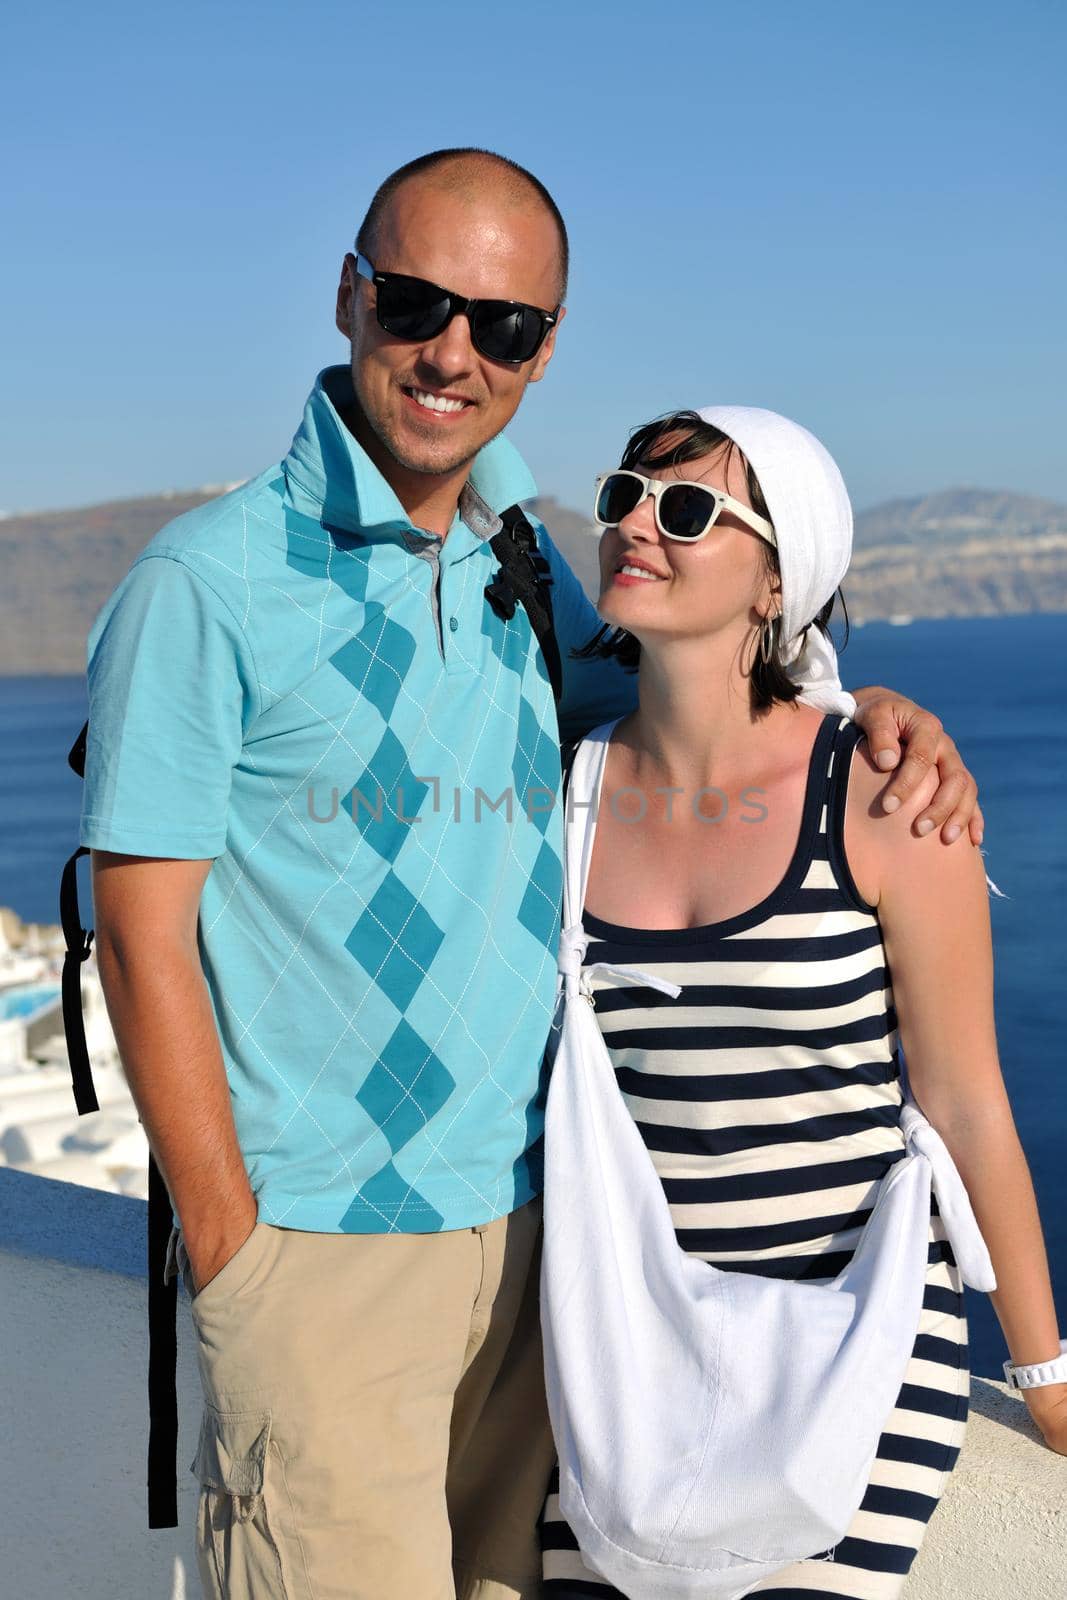 young couple portrait in love have romantic time on summer vacation holidays in greece santorini